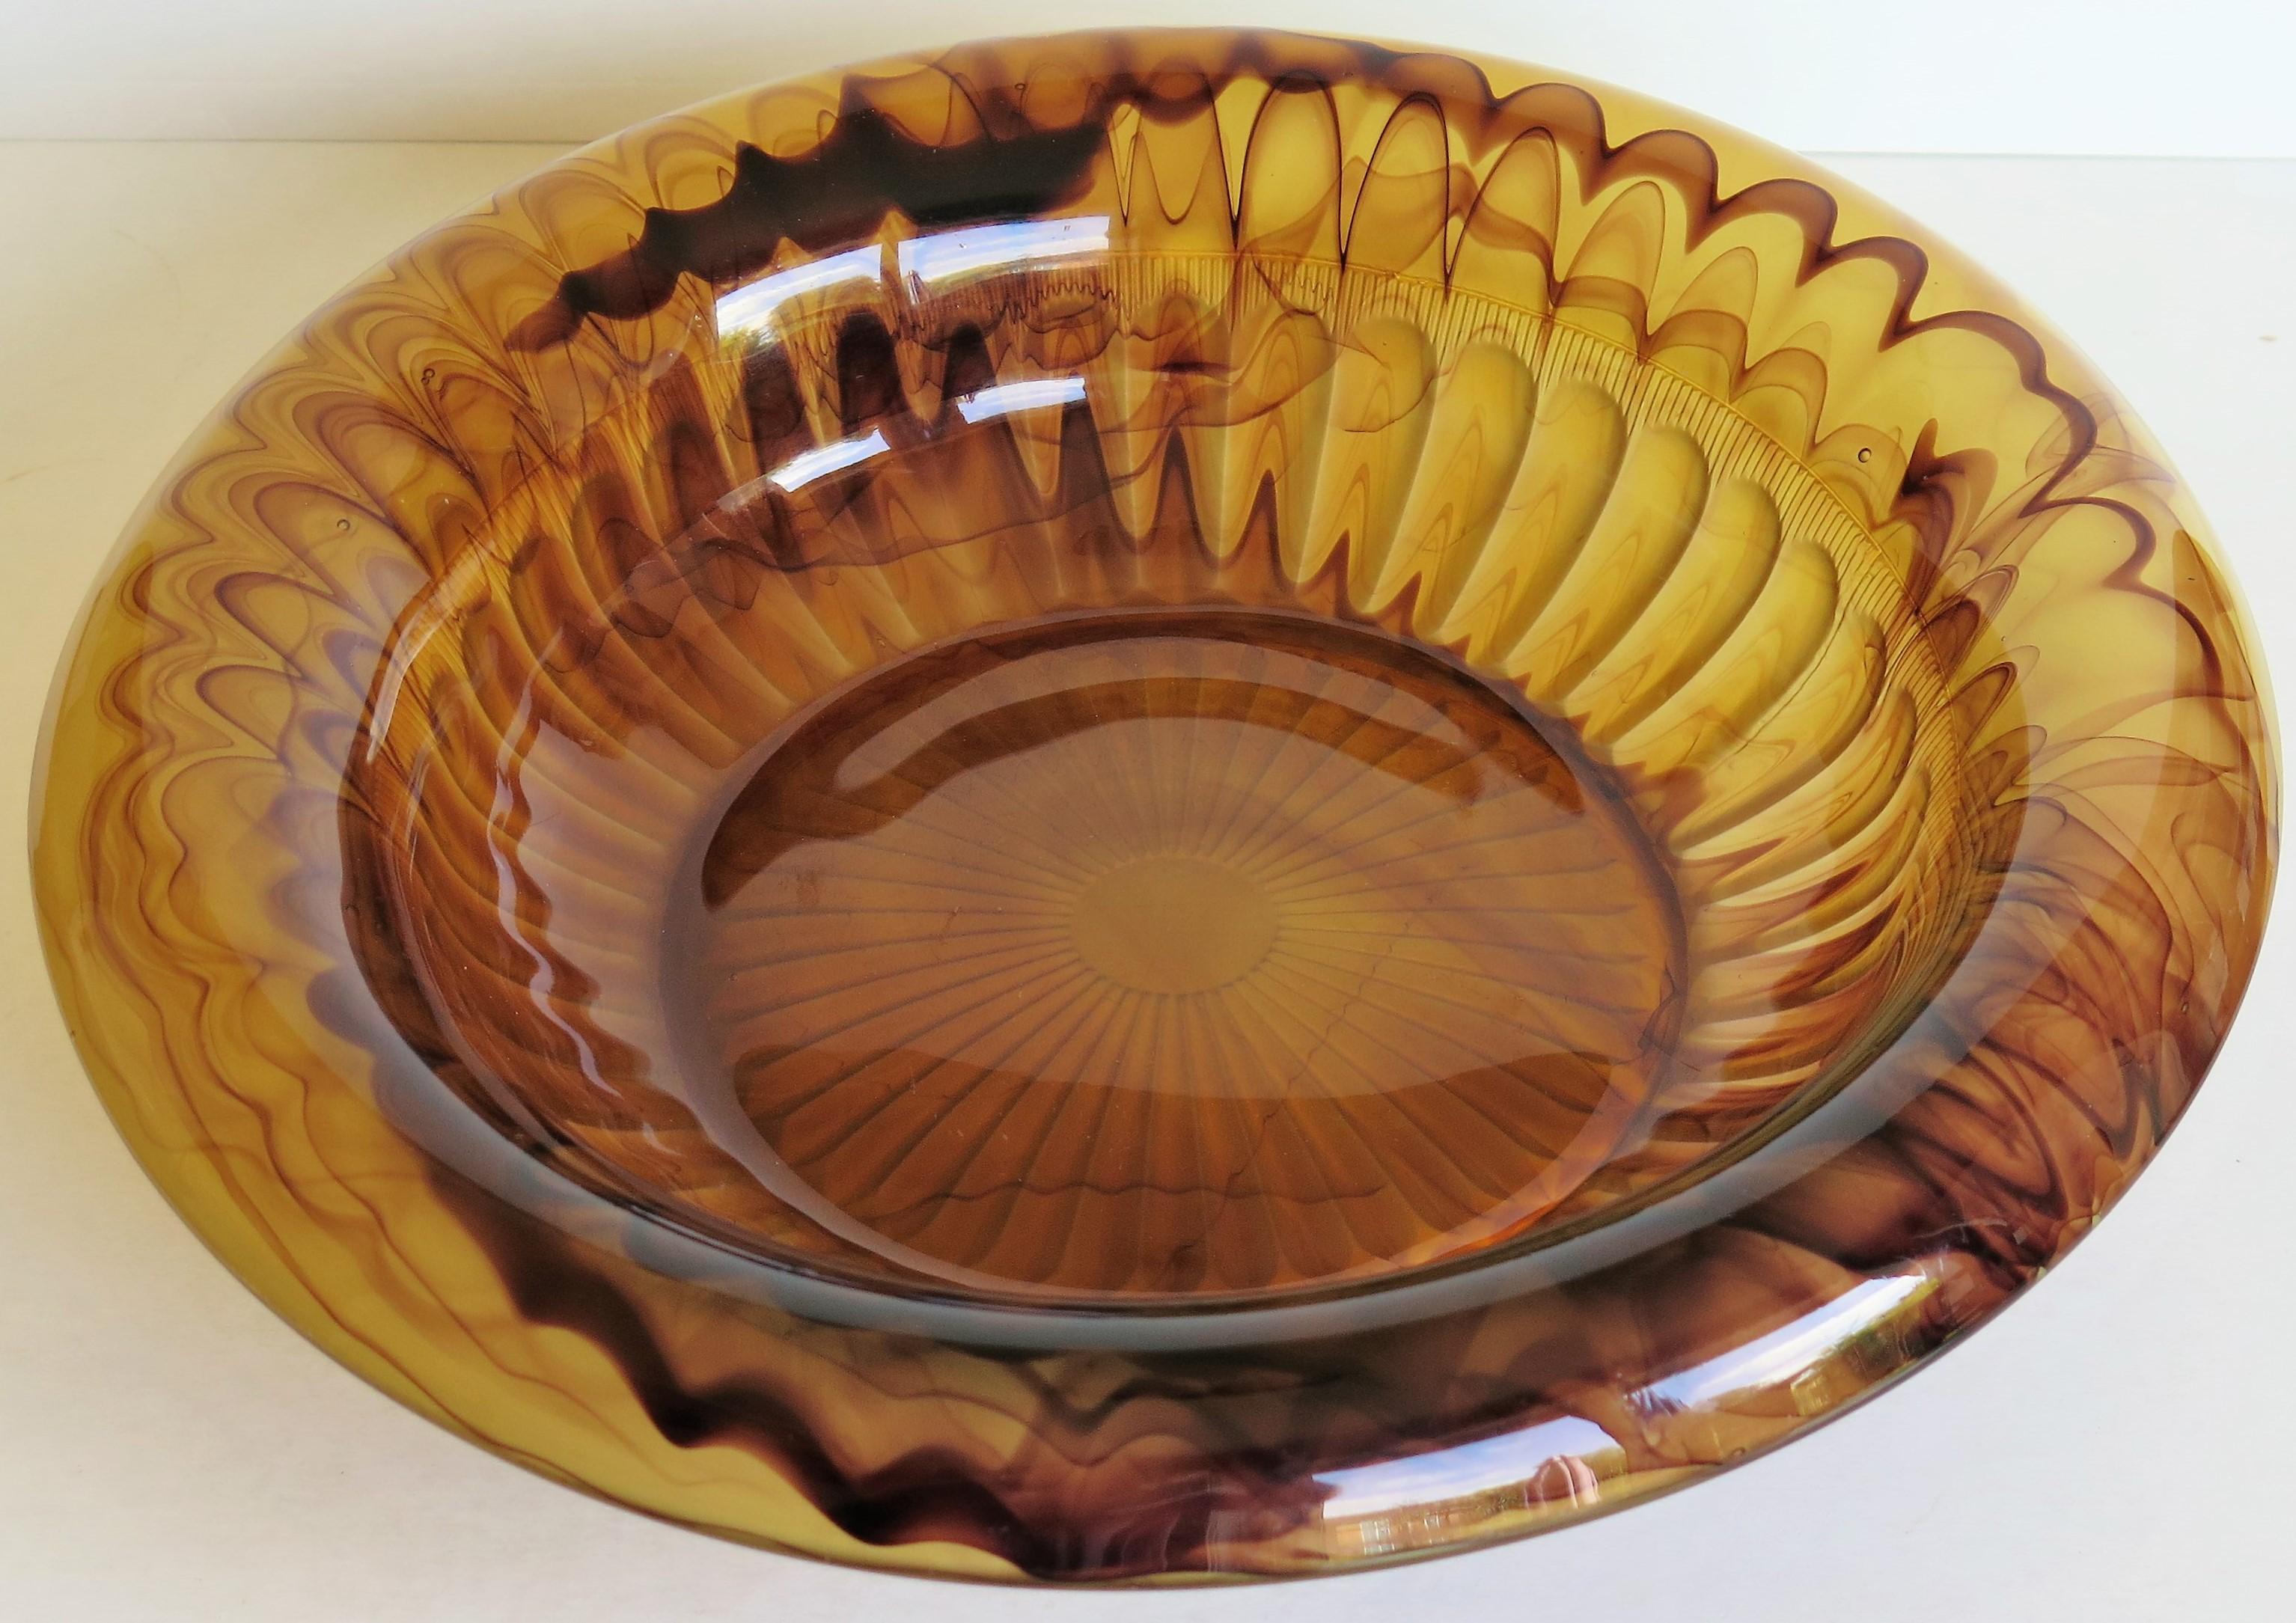 This is a beautiful large glass bowl made by George Davidson and Co. of Gateshead, England who started production of cloud glass in 1923.

This bowl has a roll-over rim and is shape or pattern 1910D as seen in their catalogues of 1931. The bowl